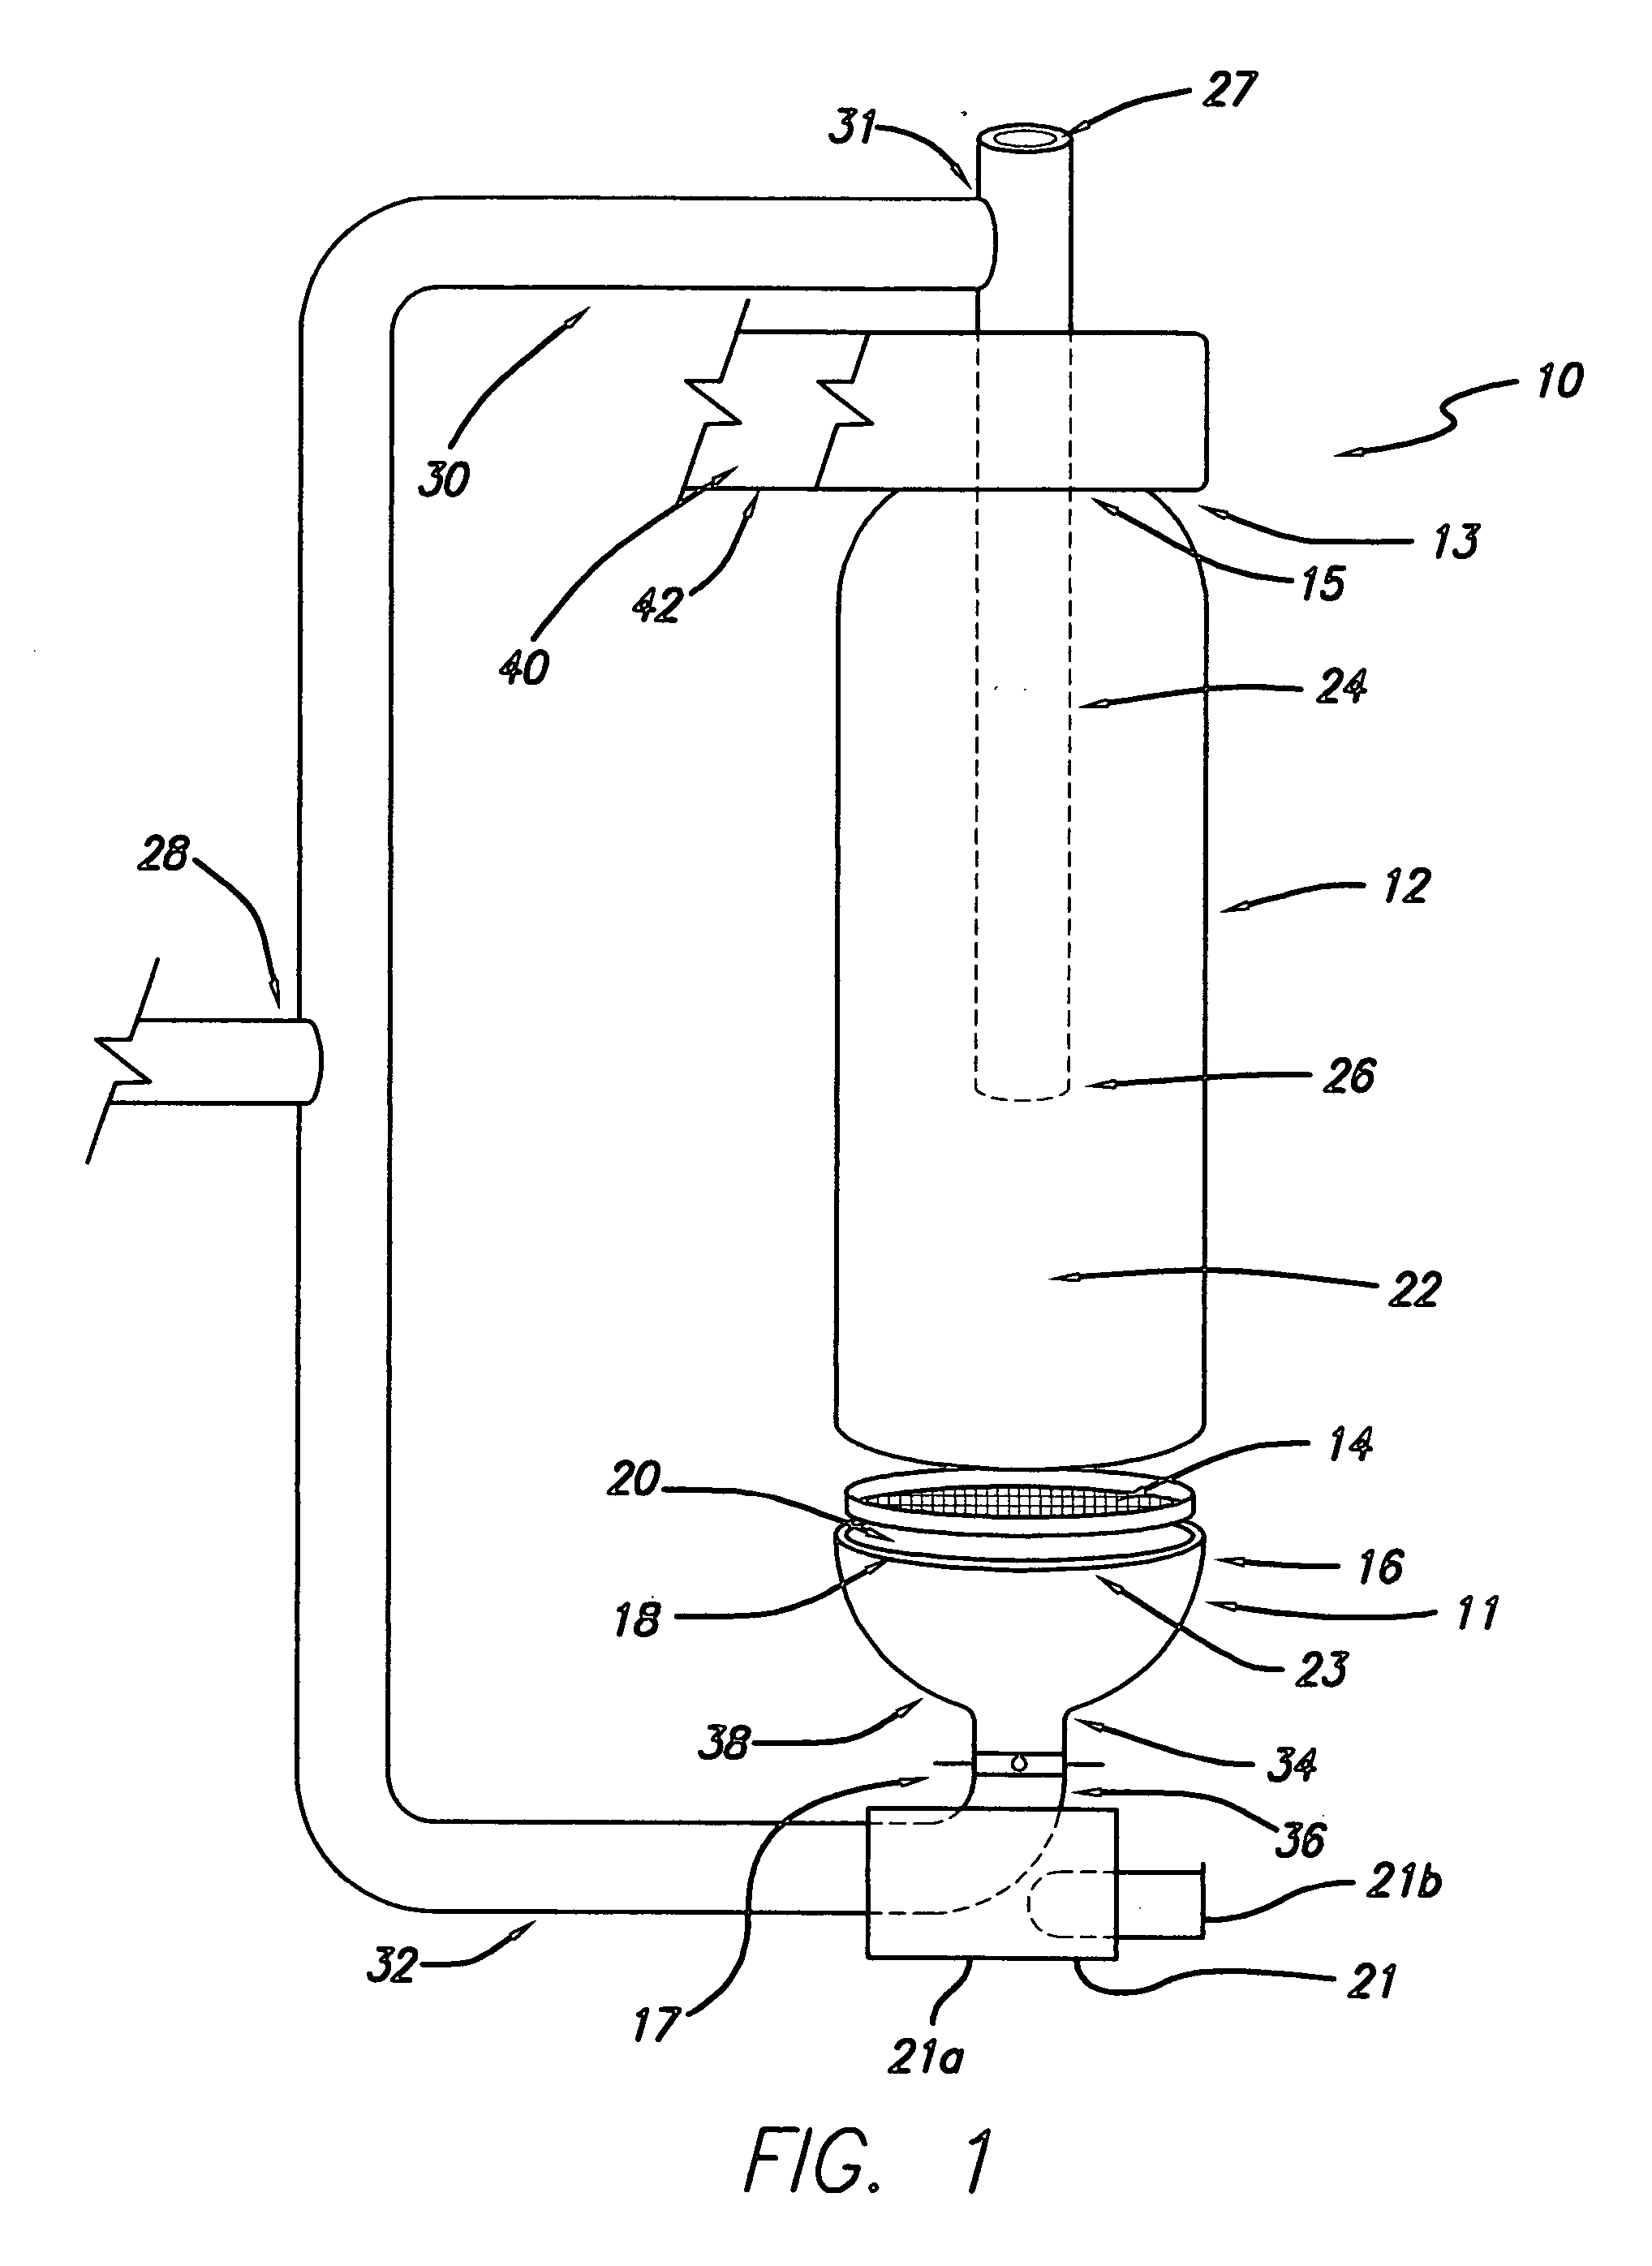 Biomass pellet fuel heating device, system and method